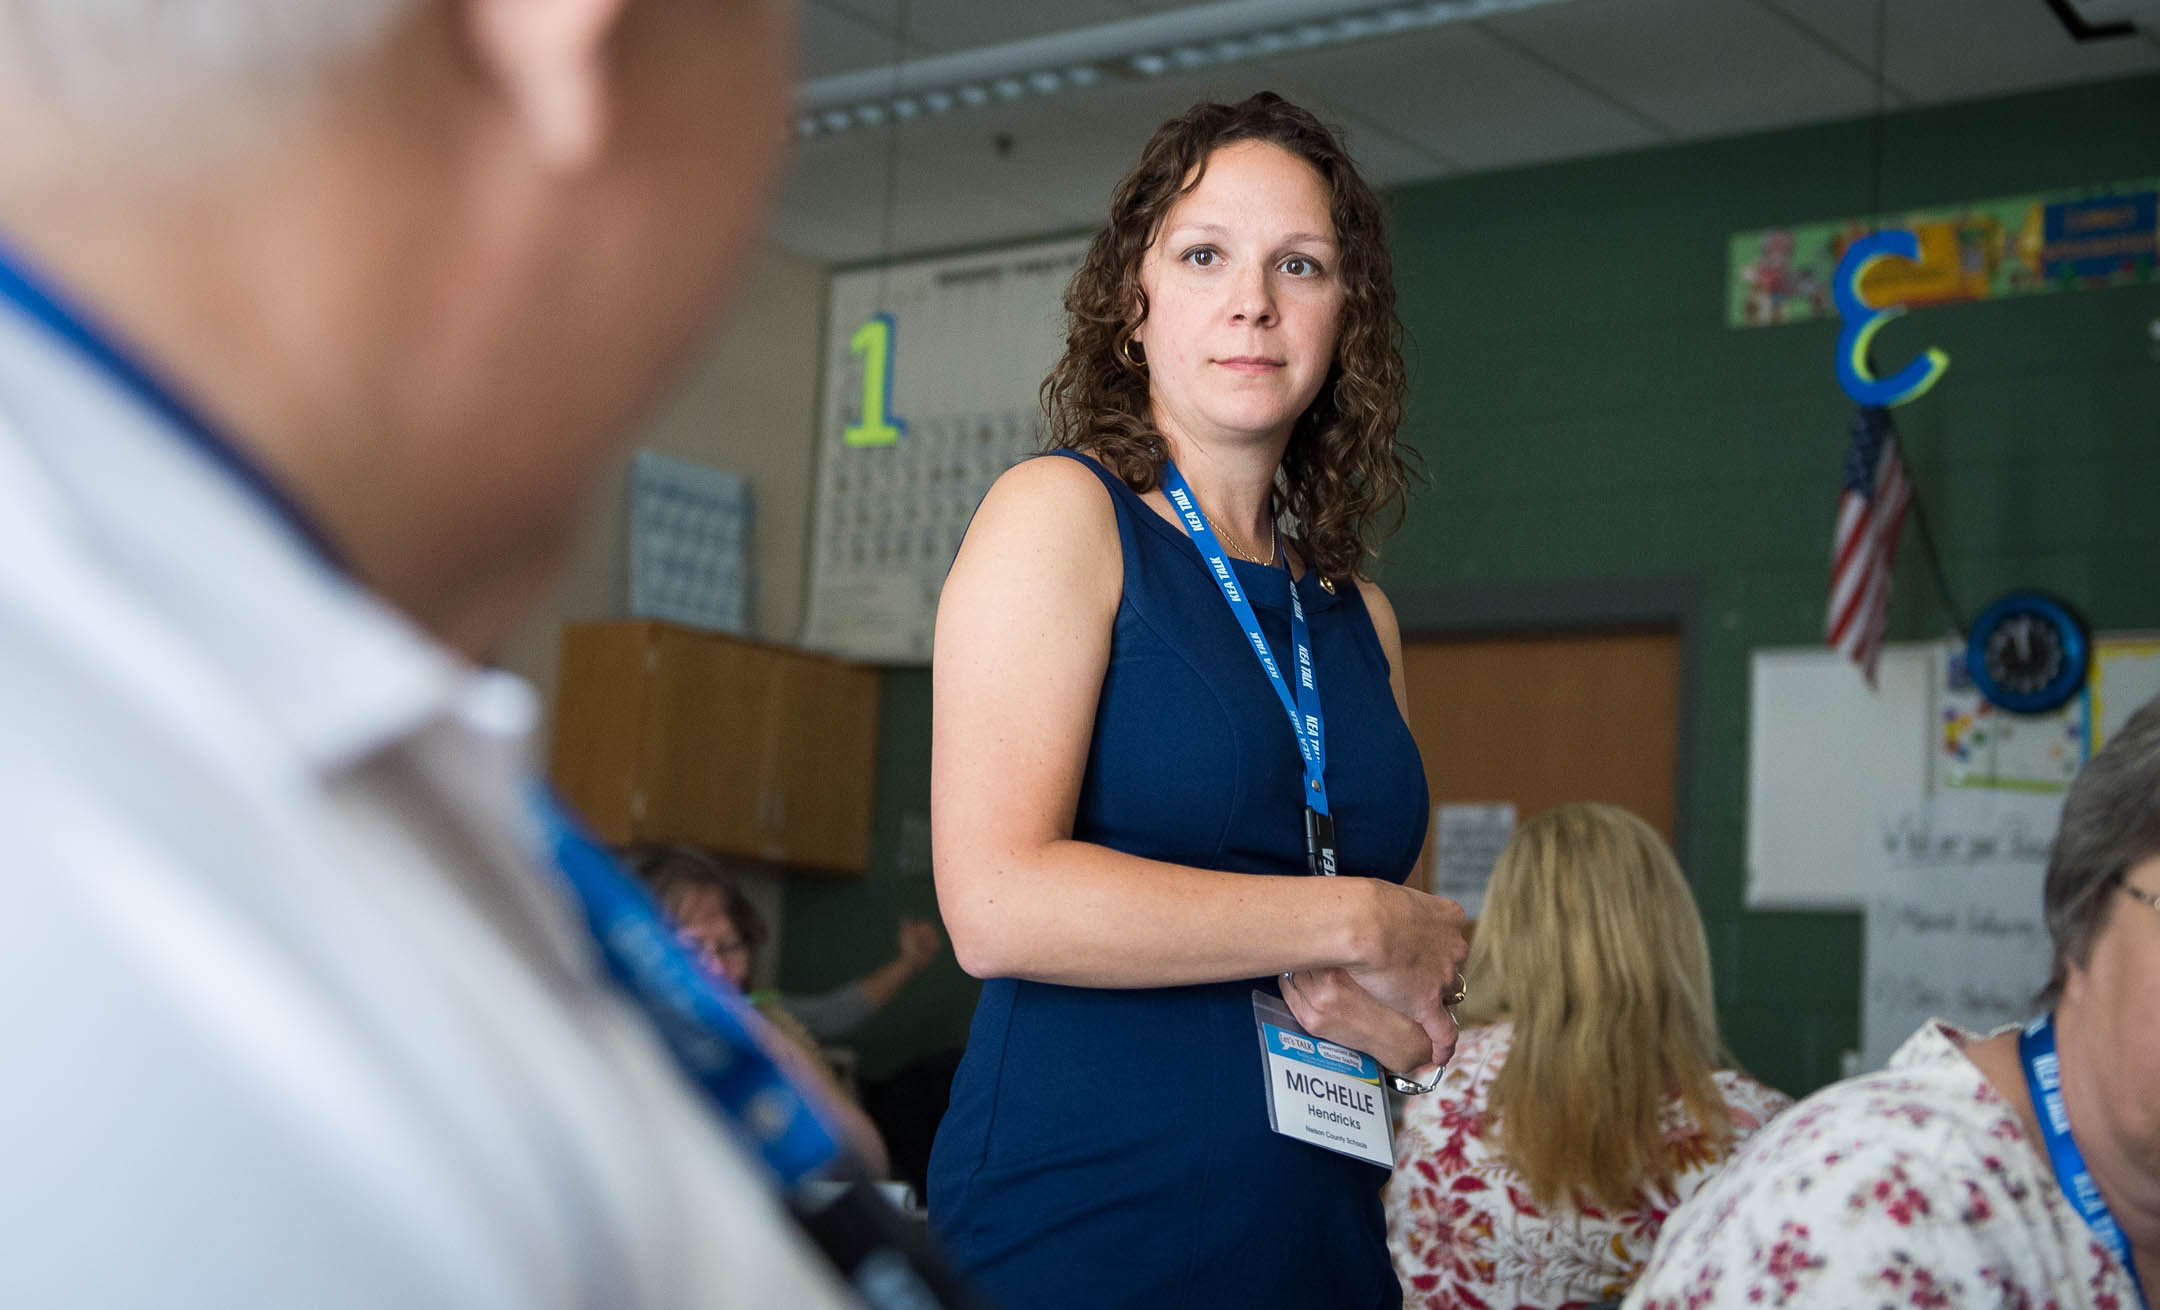 Michelle Hendricks, an instructional coach at Boston Elementary School (Nelson County), listens to a fellow educator during her presentation on reducing classroom time lost in transitions at the Let's TALK: Conversations About Effective Teaching and Learning conference. Hendricks' seminar addressed how to reduce transition time by completing necessary tasks calmly, quickly and efficiently. Photo by Bobby Ellis, June 12, 2017